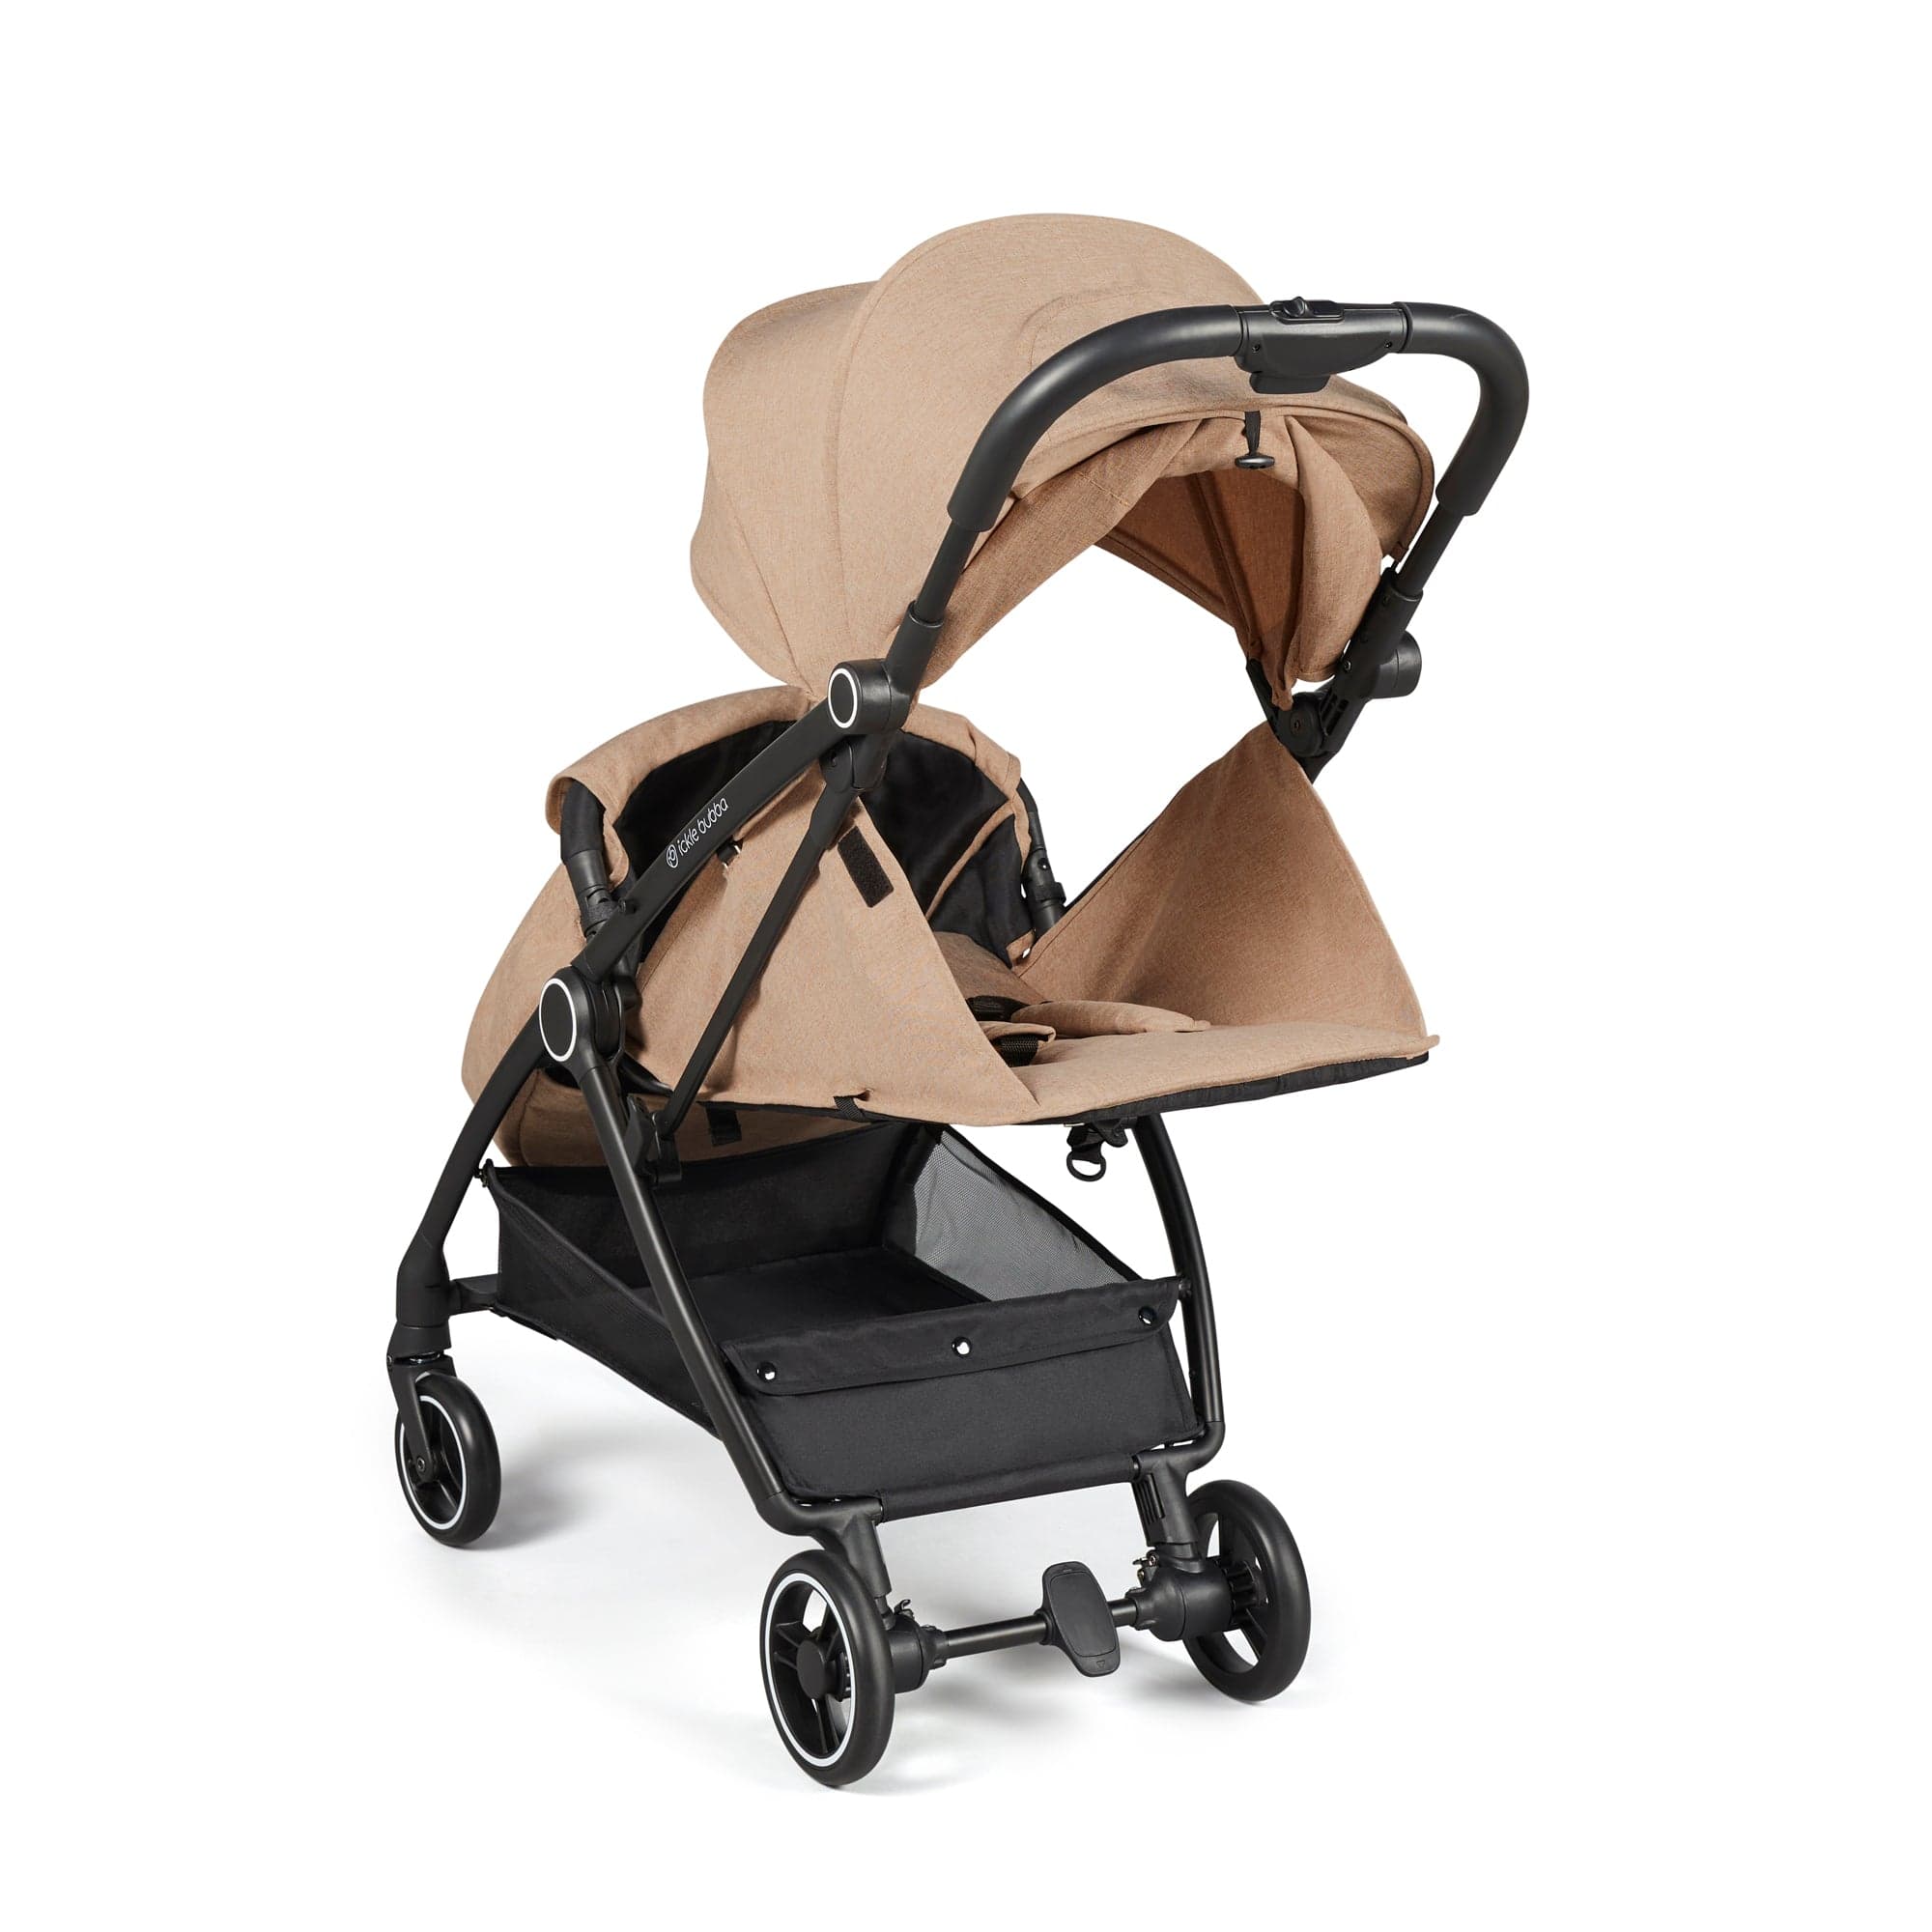 Ickle Bubba baby pushchairs Ickle Bubba Aries Prime Autofold Stroller - Biscuit